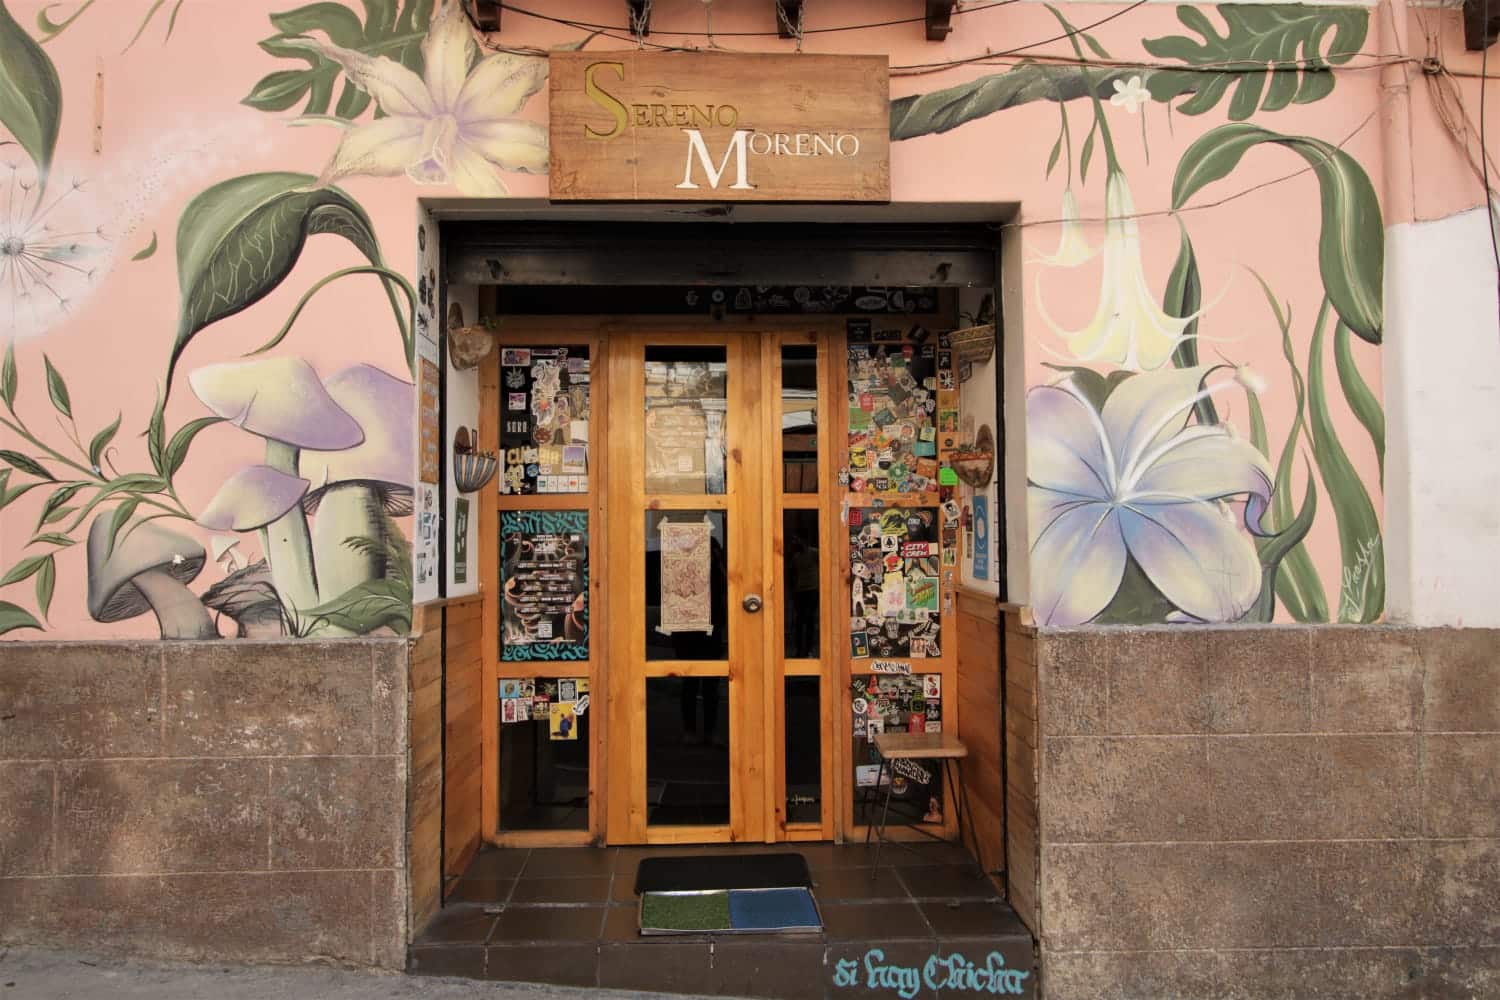 Front door of Sereno Moreno is made of wood and glass. The front wall is painted with a mural of flowers white flowers, green leaves and stems,  with a pale pink background.